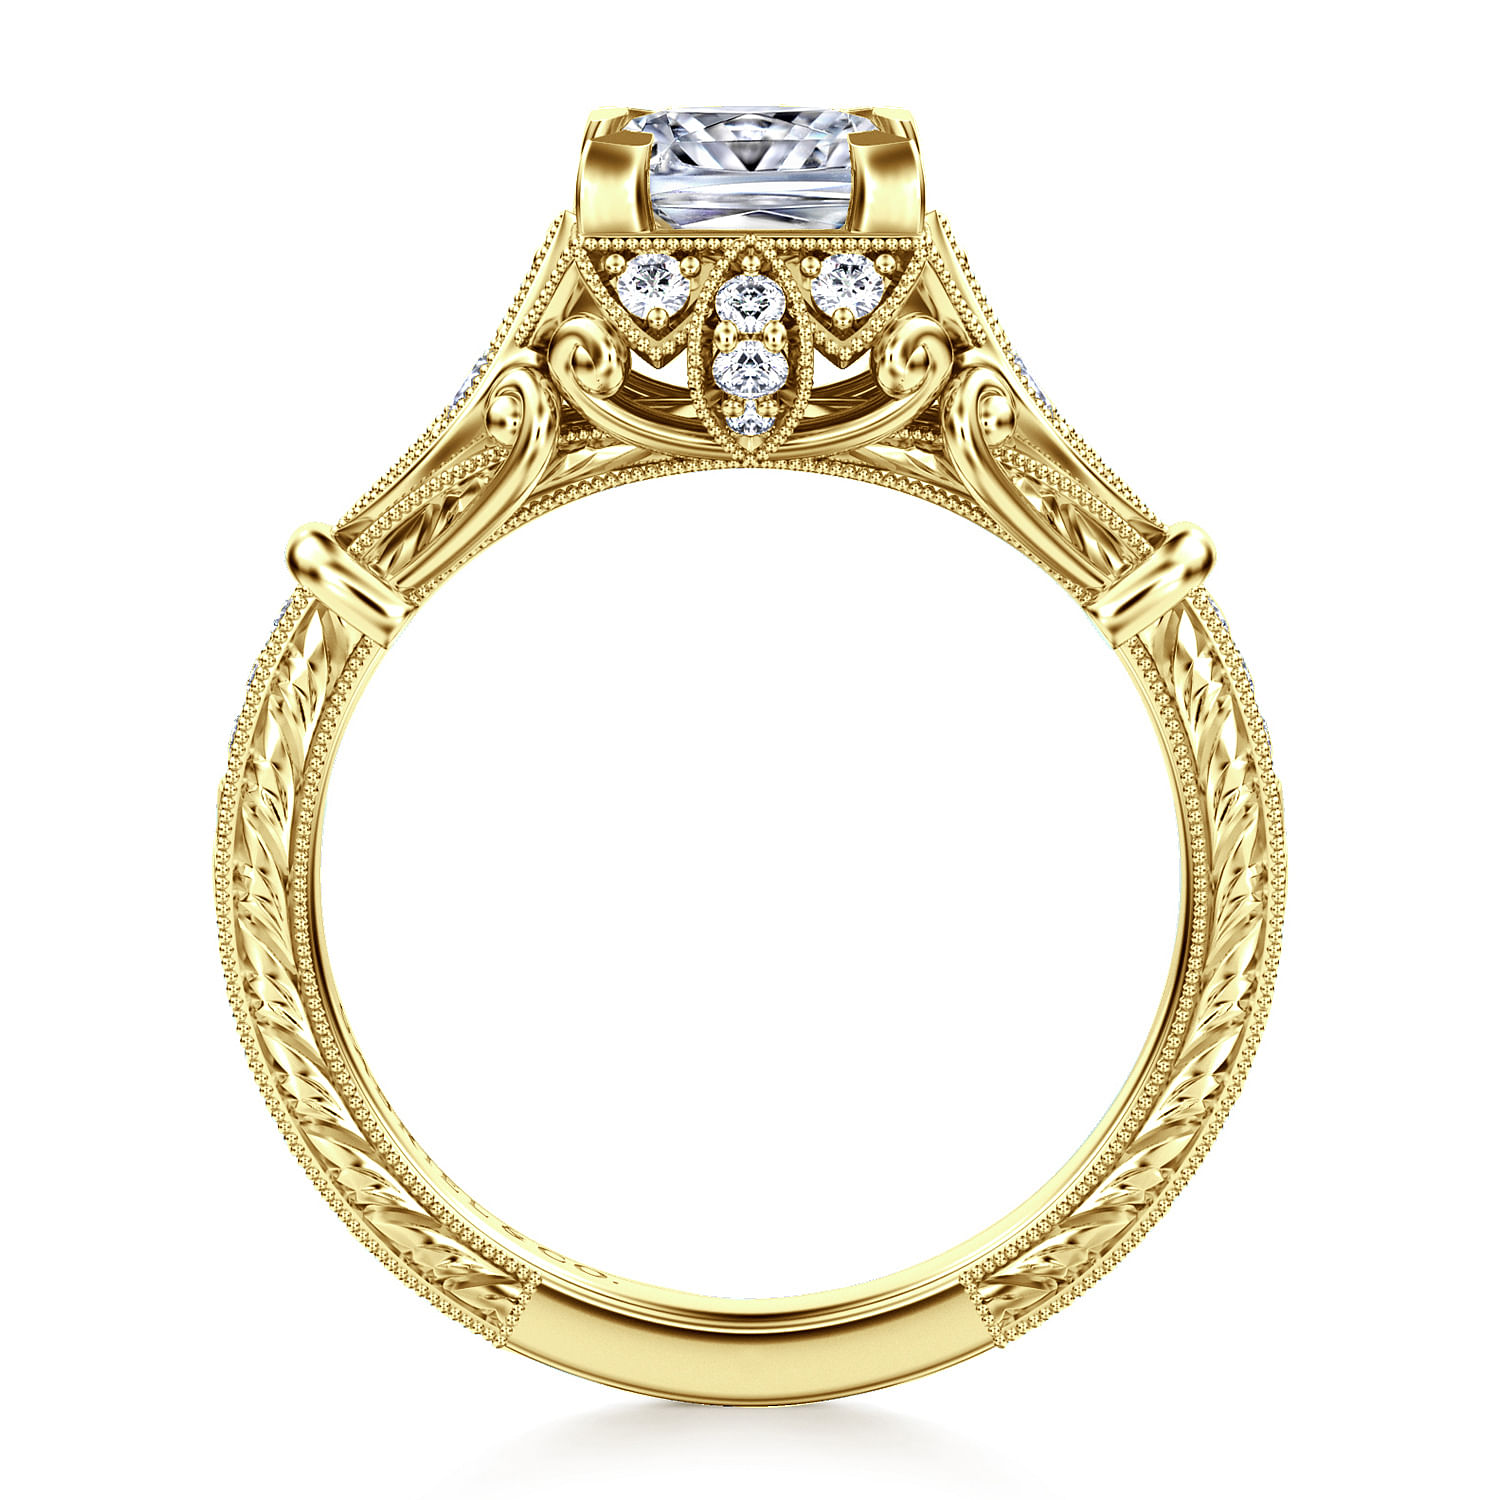 Unique 14K Yellow Gold Vintage Inspired Princess Cut Halo Diamond Engagement Ring